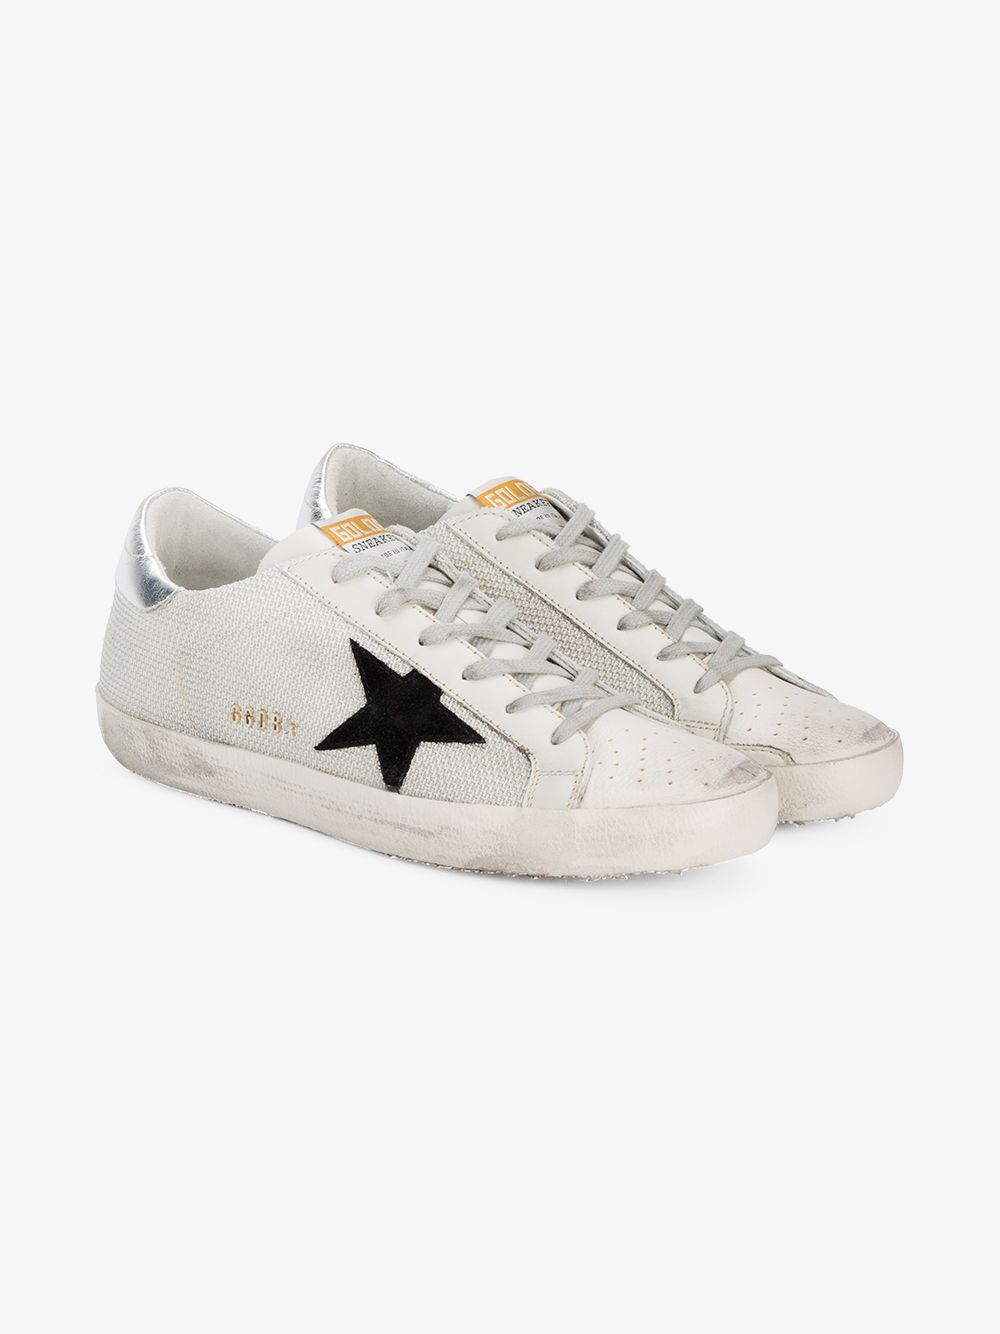 Golden Goose Deluxe Brand White Black Superstar Mesh sneakers | Browns Fashion